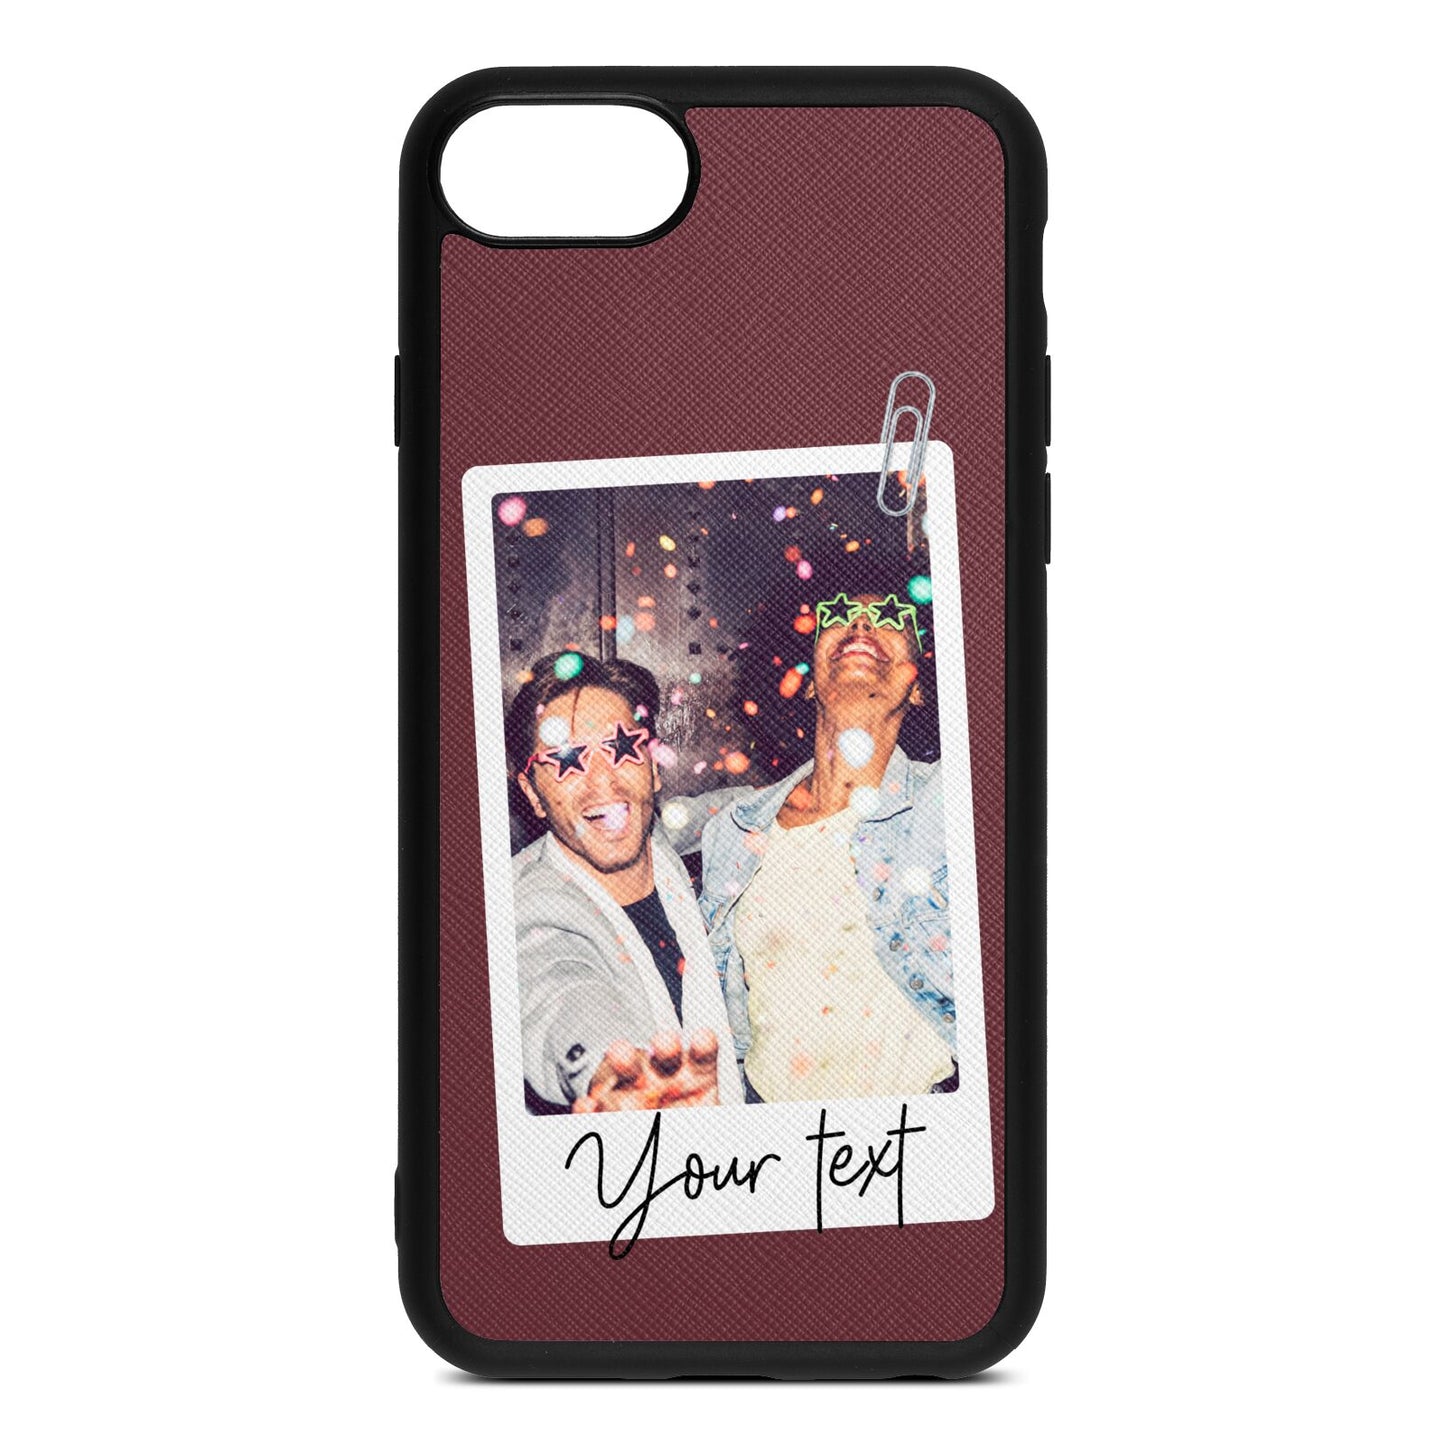 Personalised Photo with Text Rose Brown Saffiano Leather iPhone 8 Case